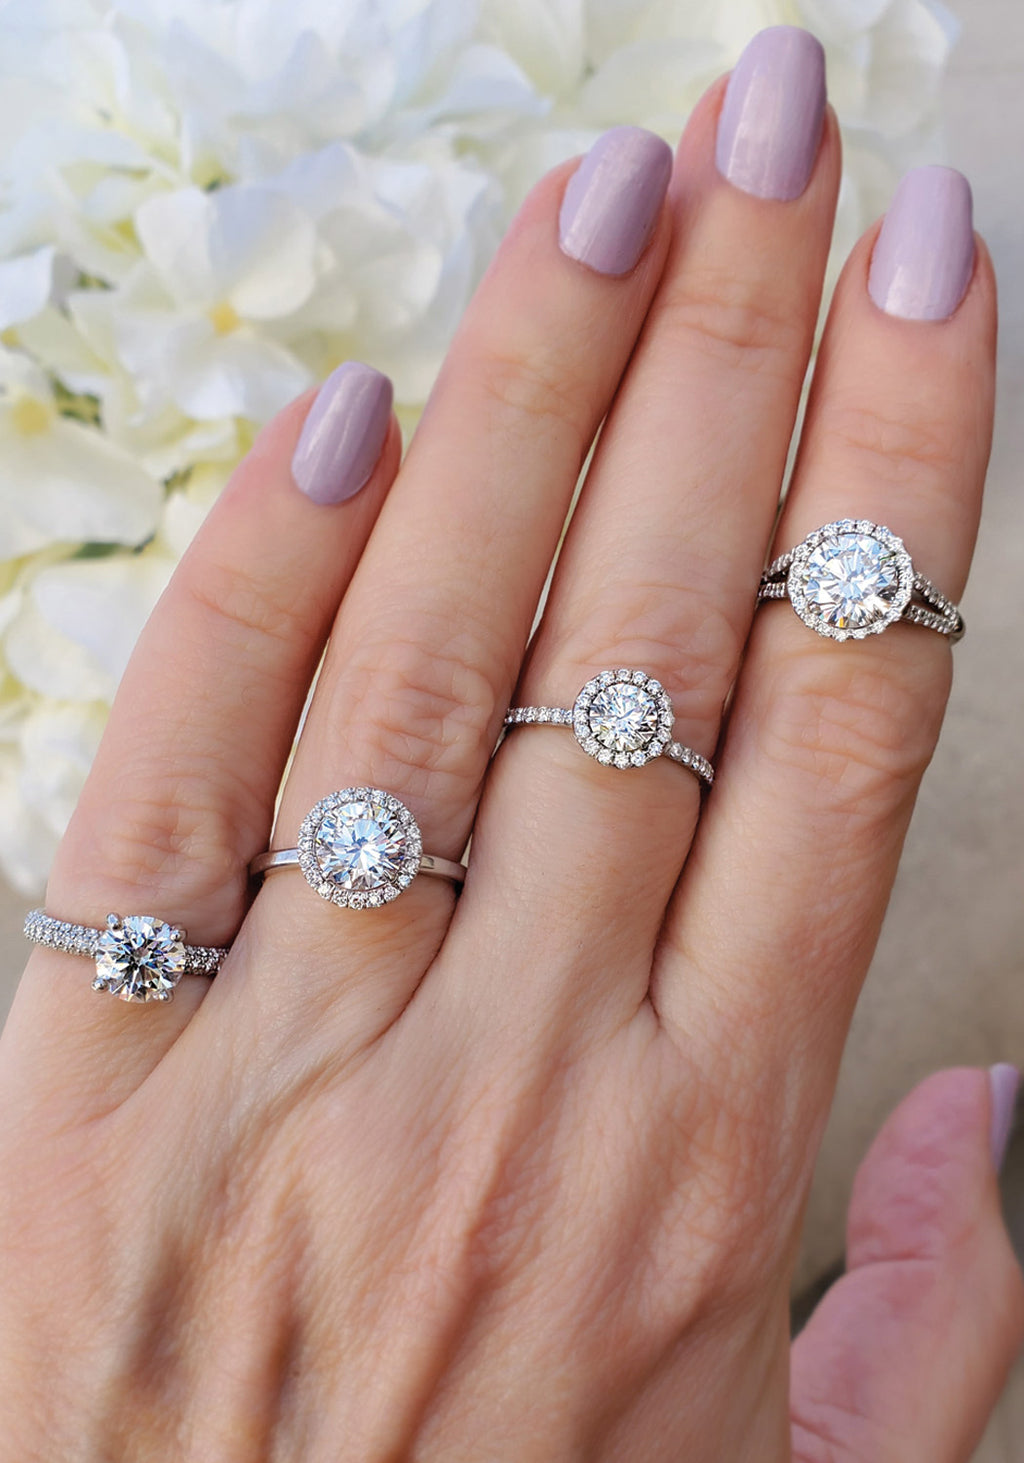 Diamond Engagement Rings from OsterJewelers.com